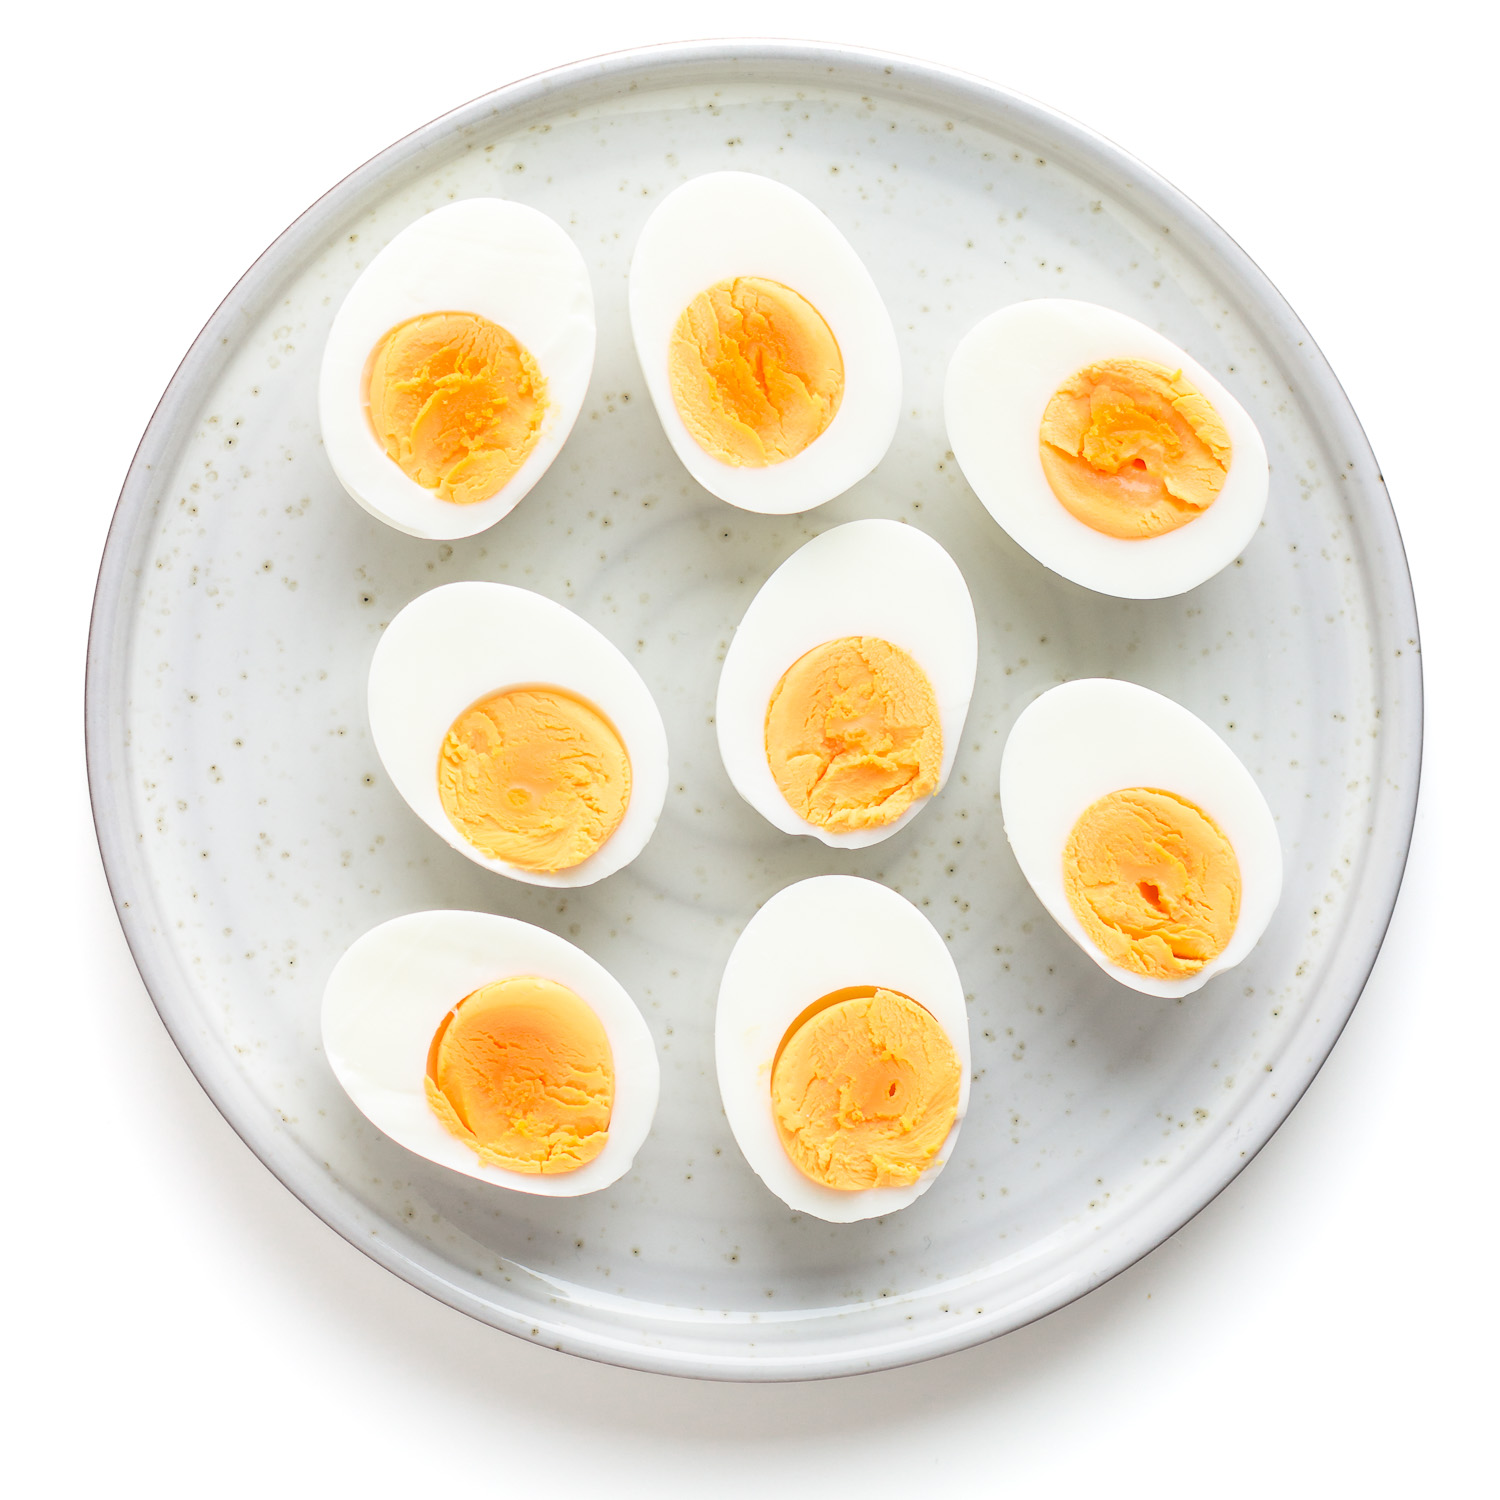 Hard boiled eggs that have been sliced in half arranged on a plate.